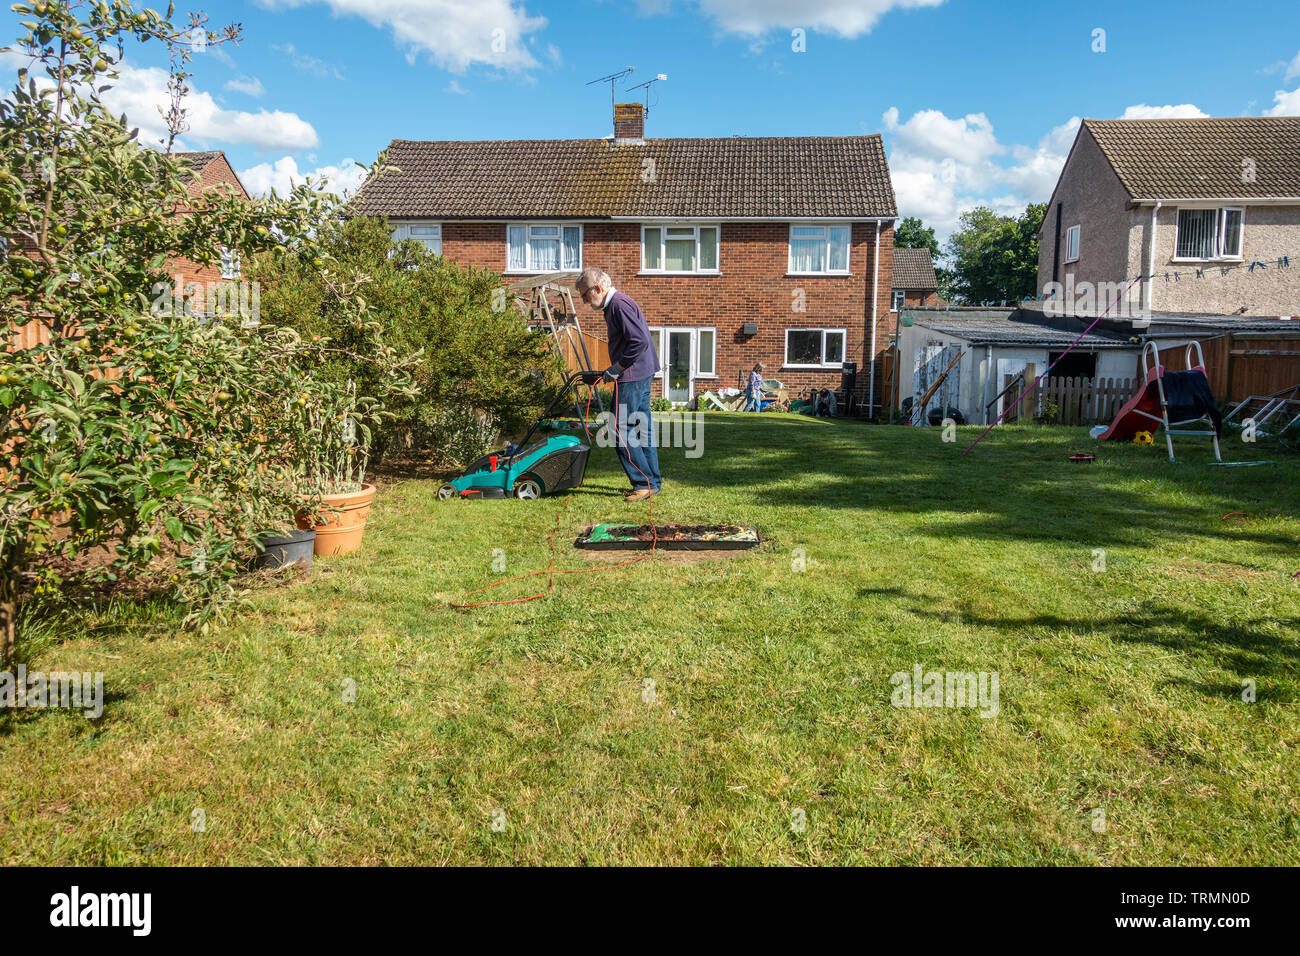 A man mows a lawn in a residential back garden with an electric lawnmower in a sunny day with blue sky in early summer. Stock Photo